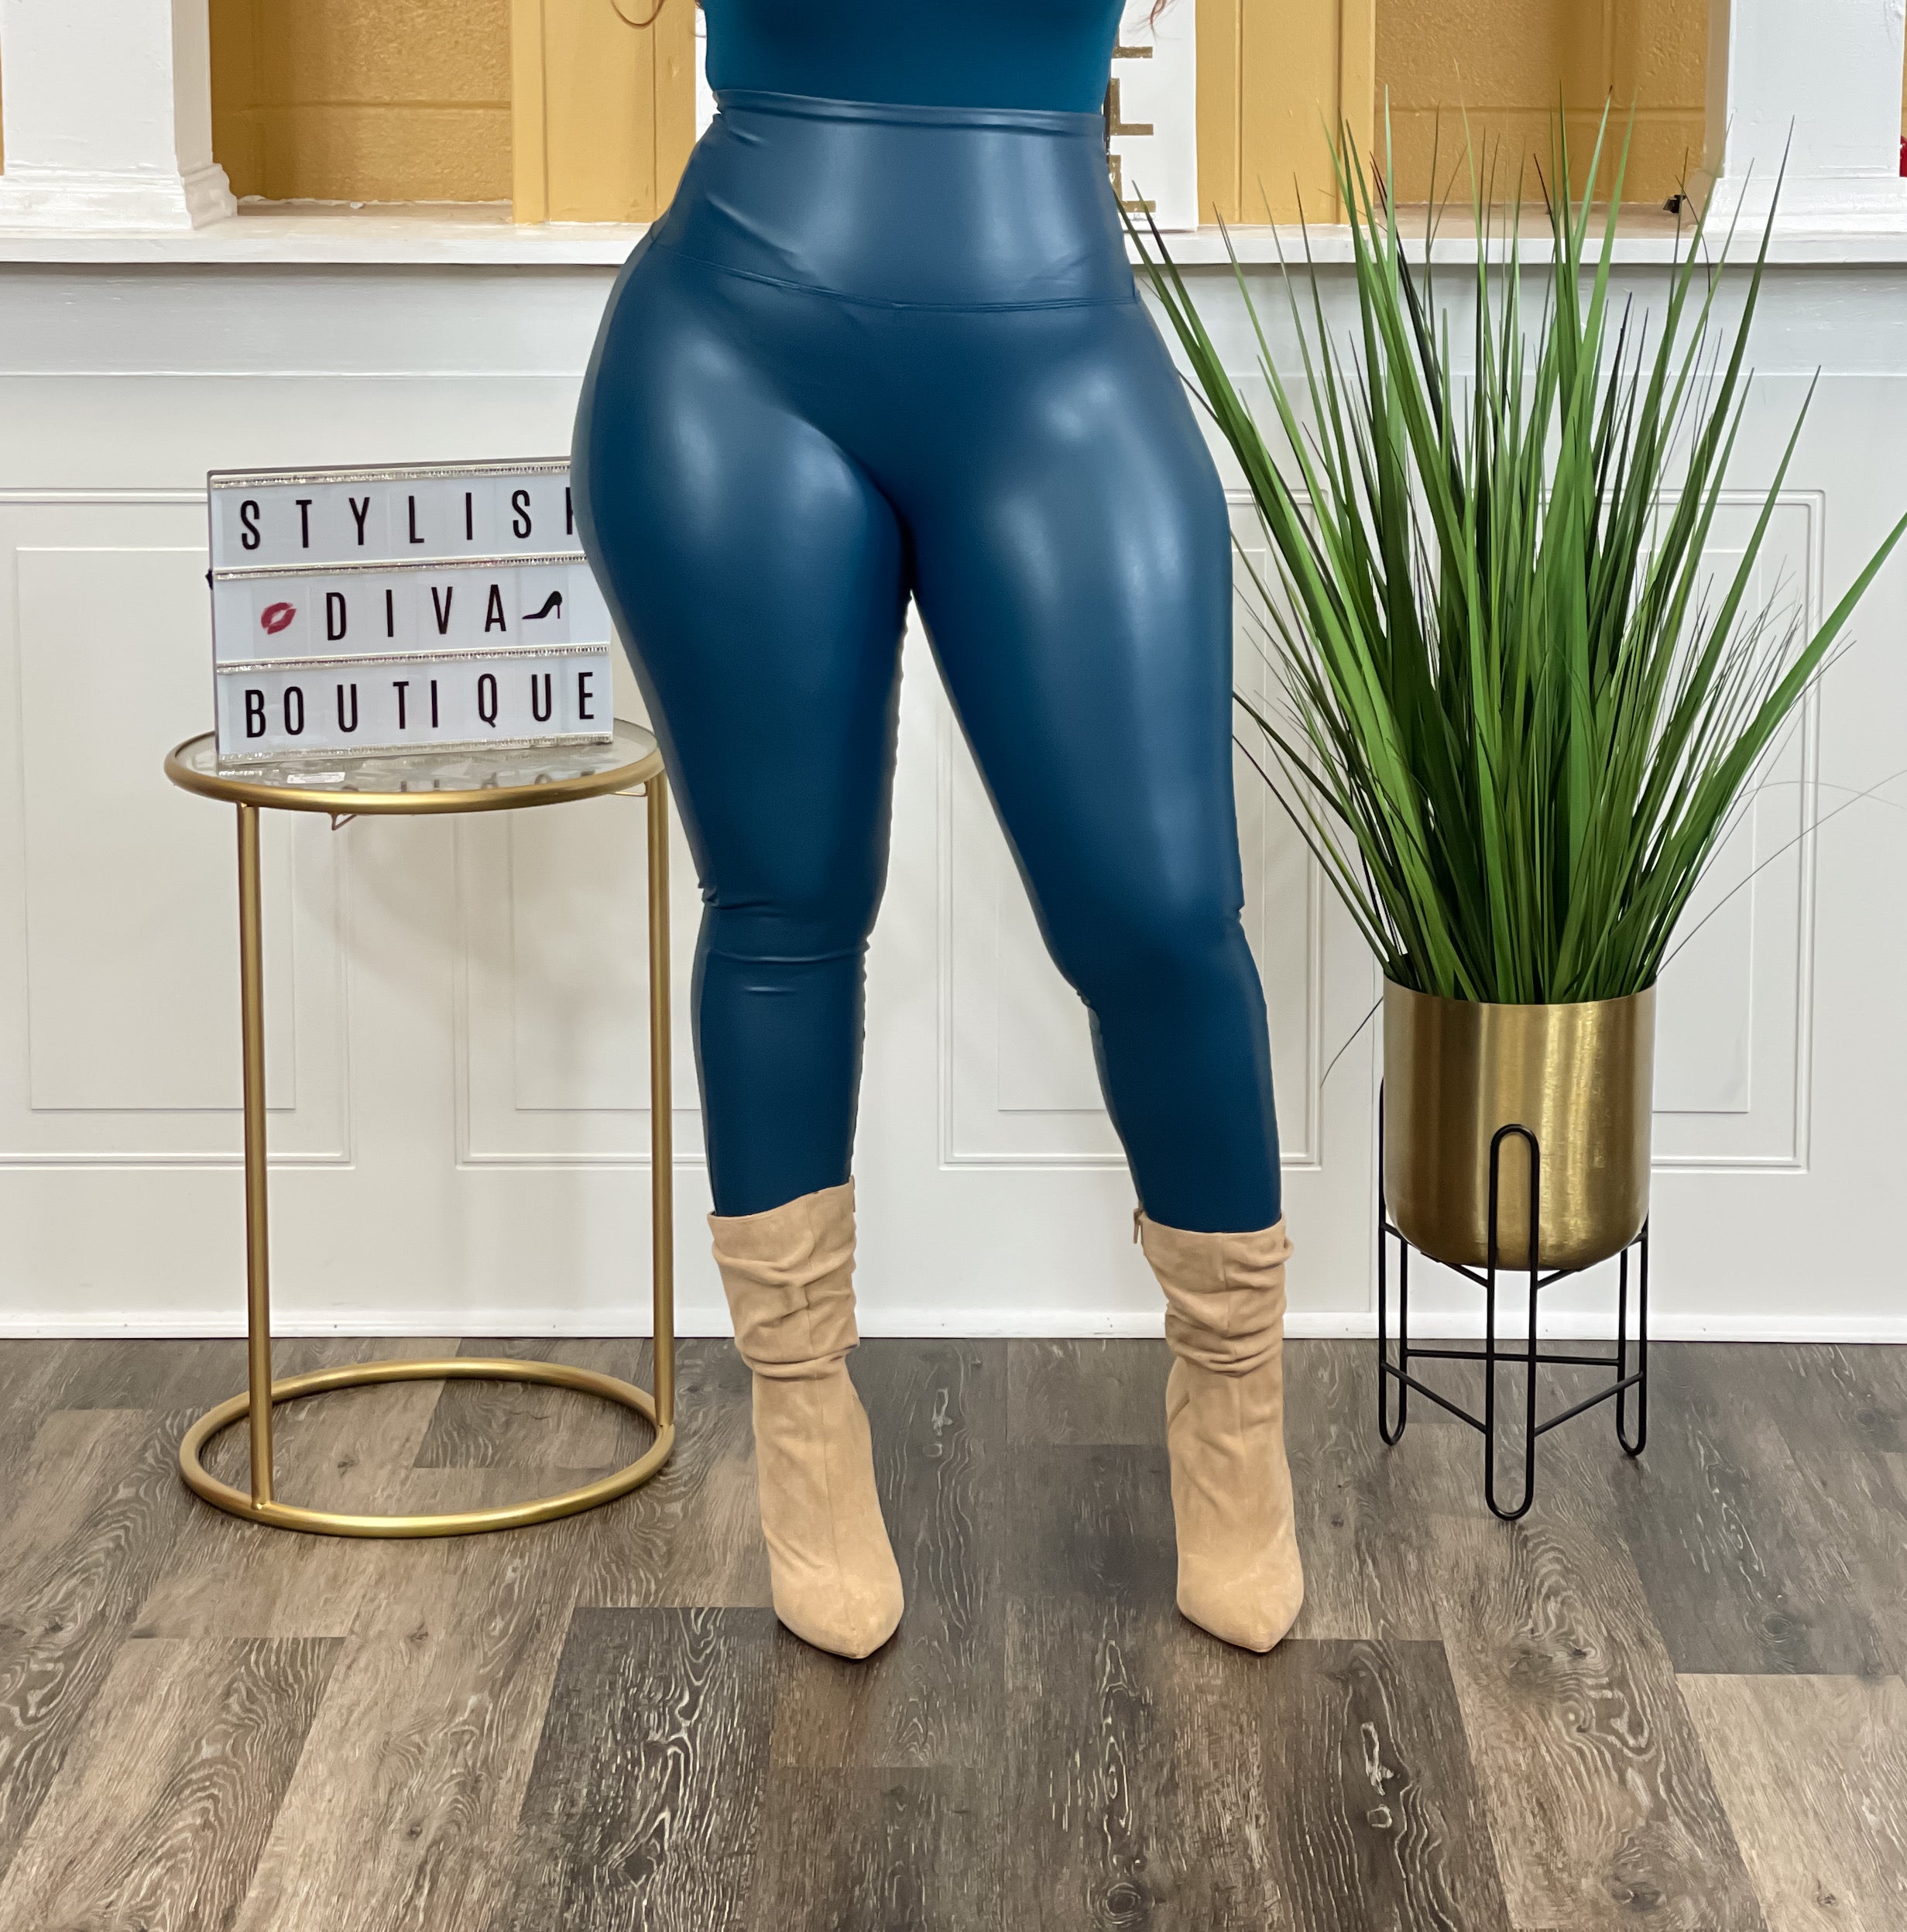 High Waisted Faux Leather Leggings